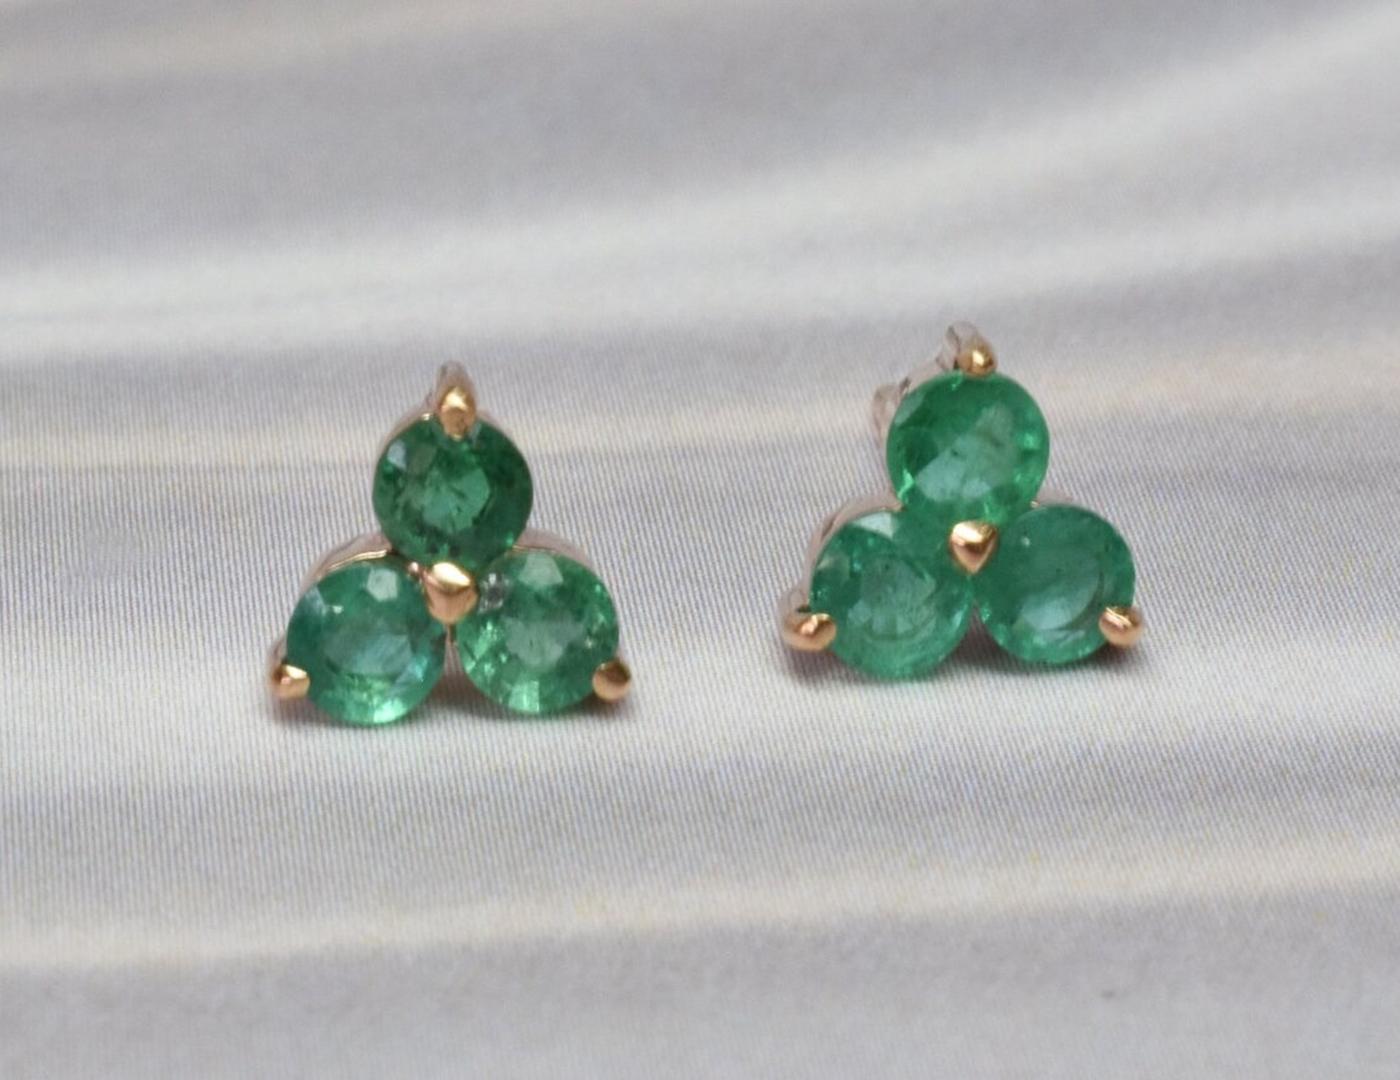 Emerald Floral Earrings in 14k Rose Gold, Yellow Gold, White Gold.

These Dainty Stud Earrings are made of solid 14k gold featuring shiny brilliant round cut natural diamonds set by master setter in our studio. Simple but unique, elegant and easy to